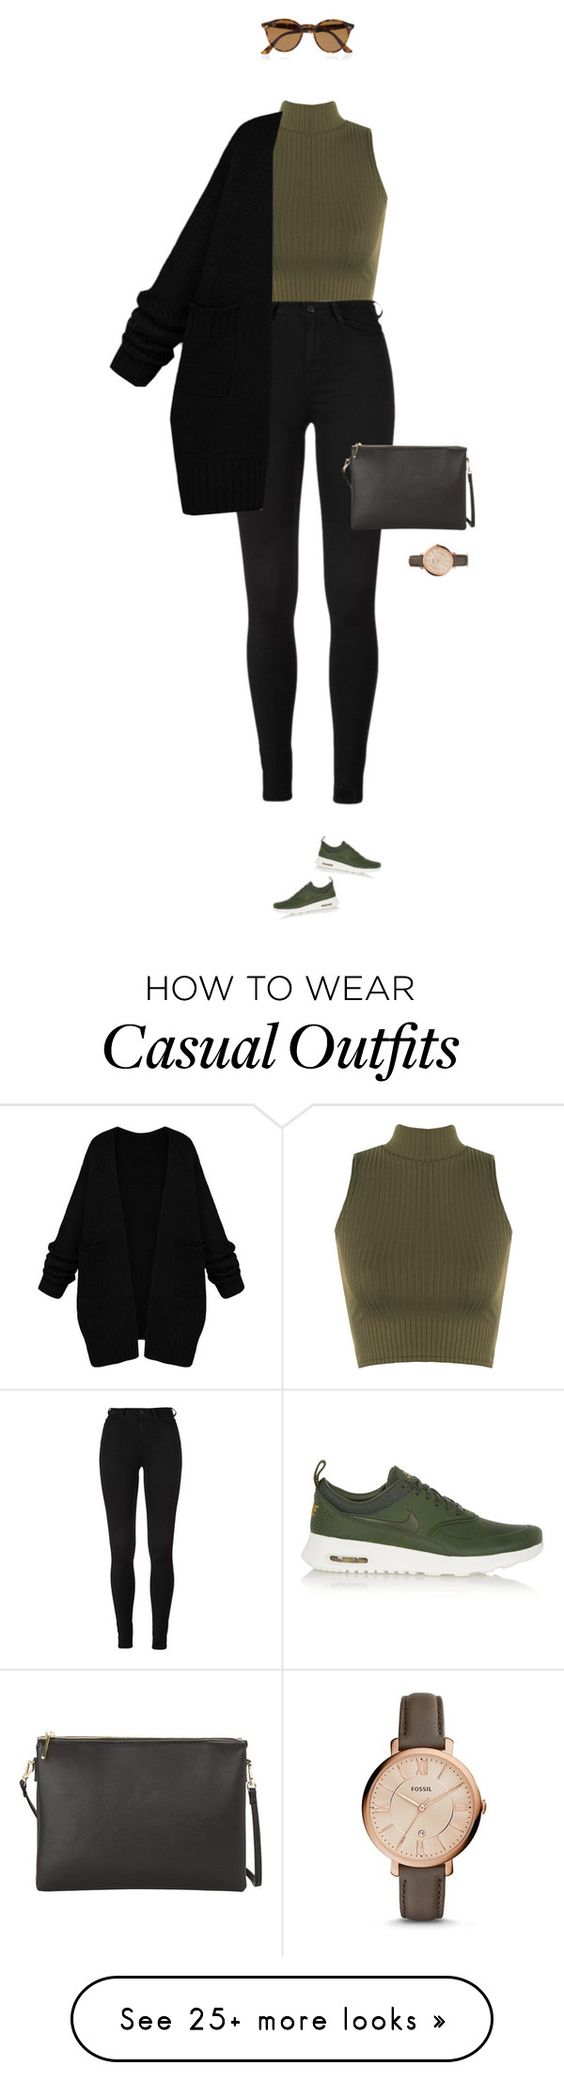 10 Gorgeous Date Night Outfits